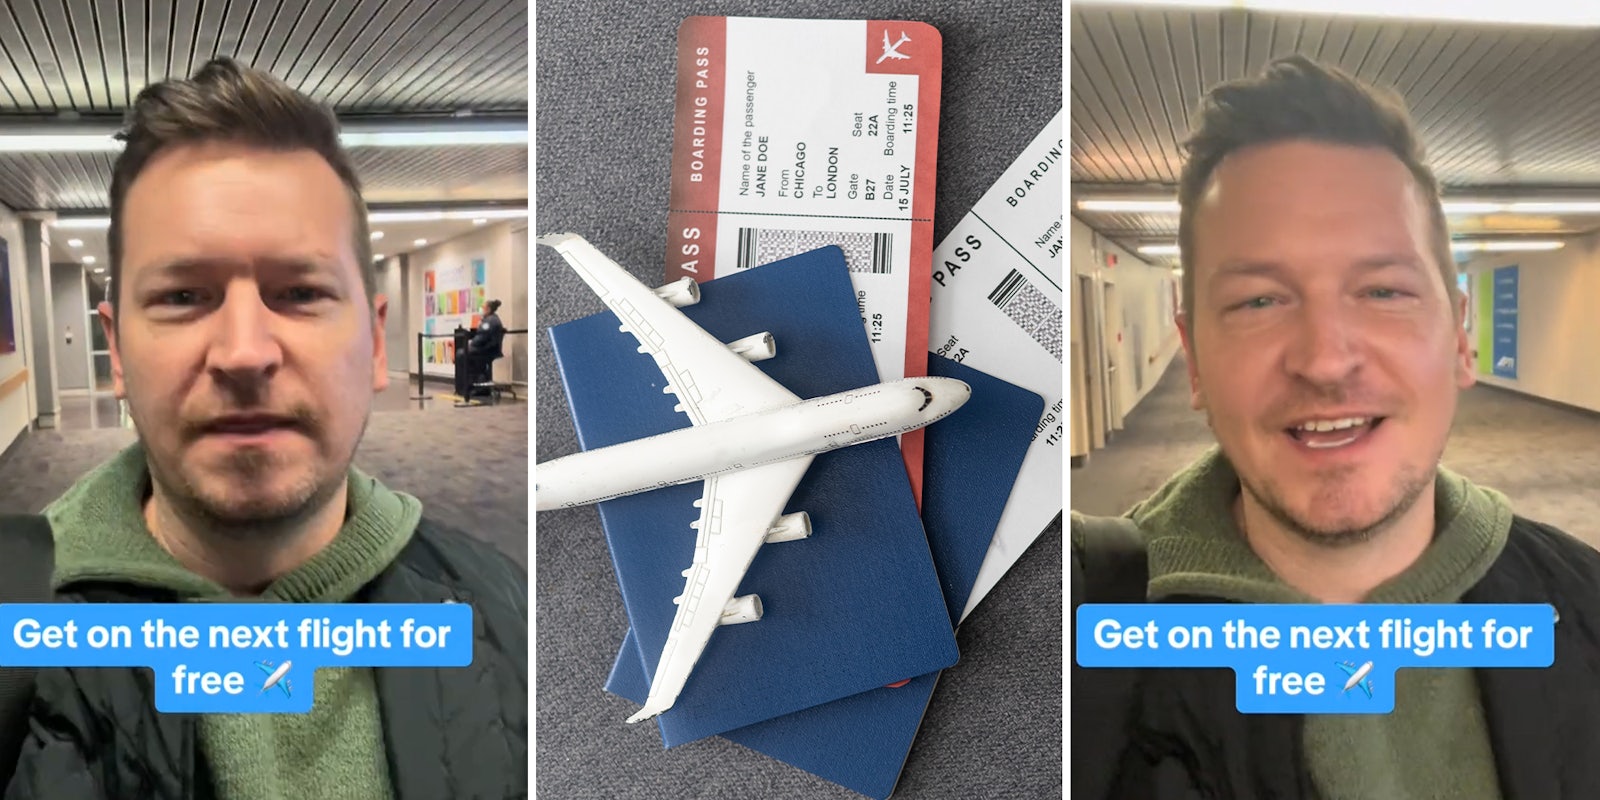 Man shares how you can get flight for free if you miss your flight